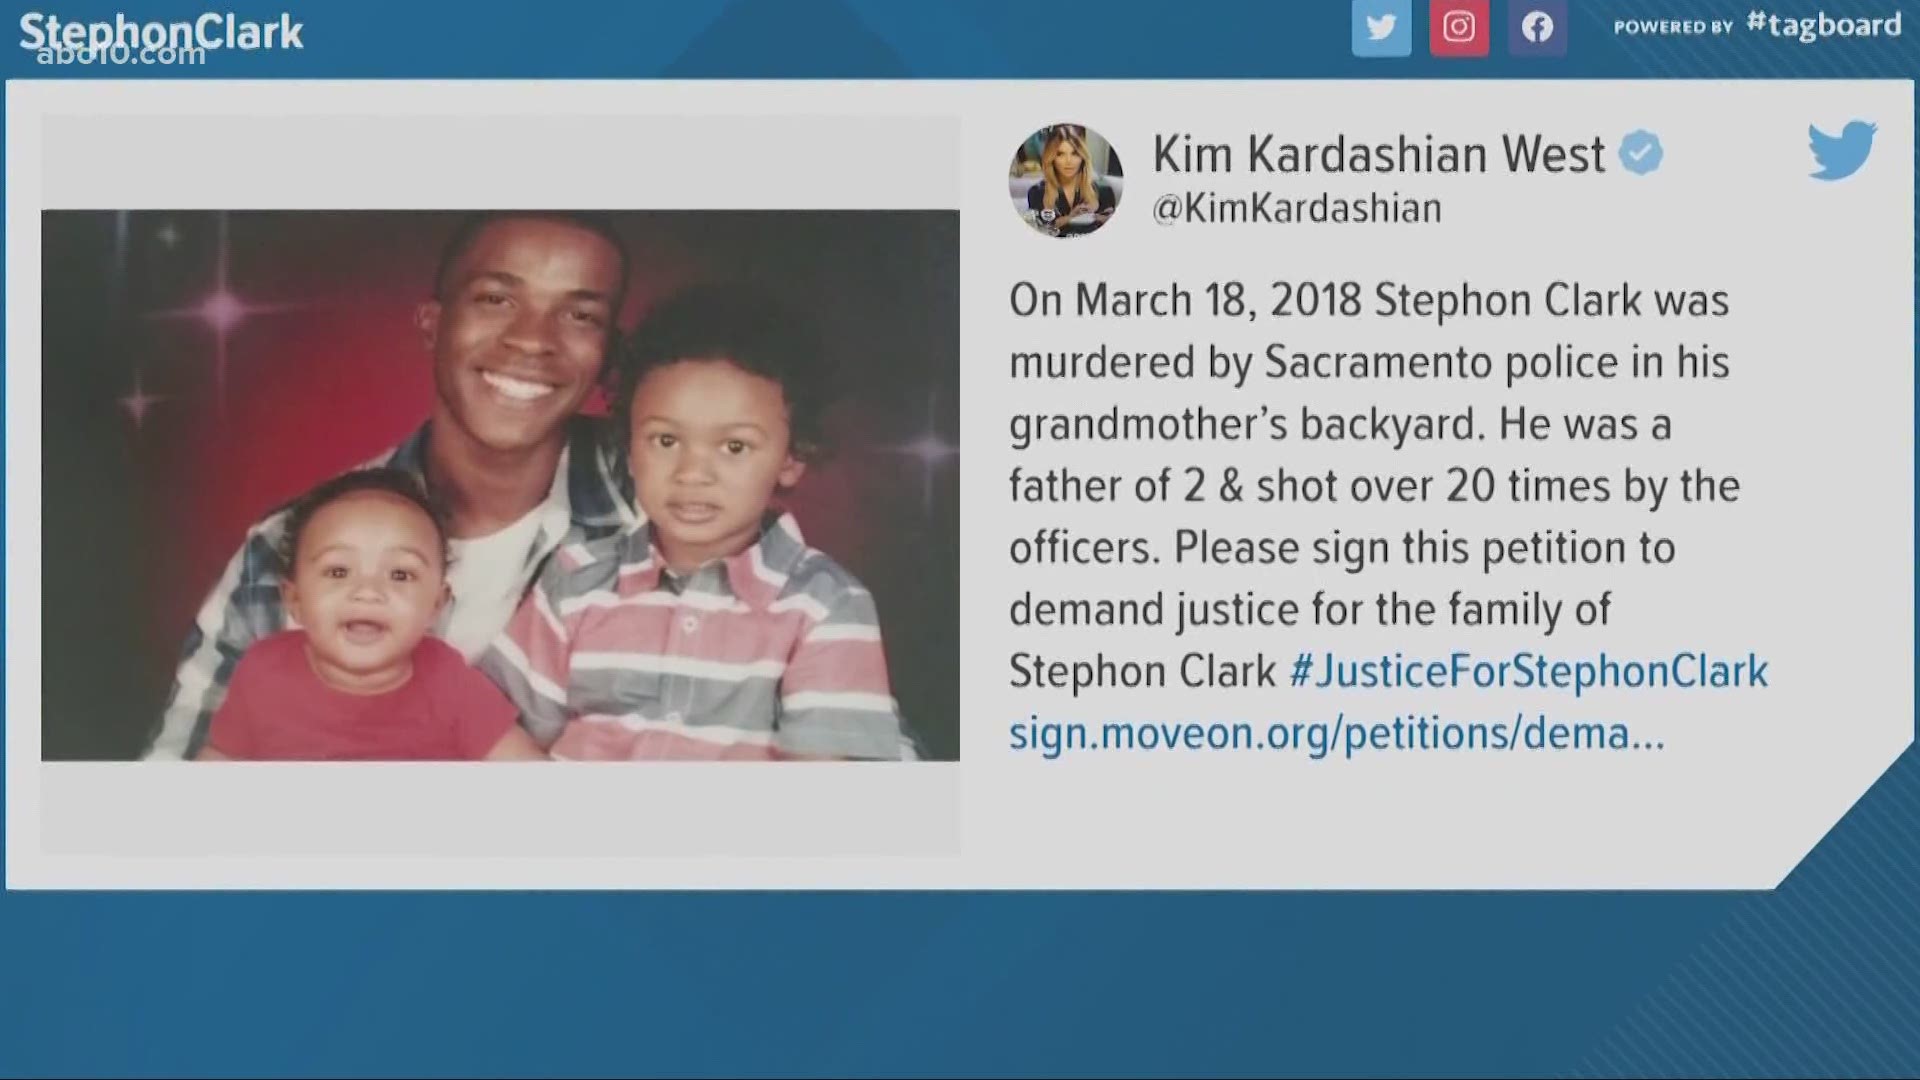 The 2-year-old petition to demand justice for Stephon Clark had less than 10,000 signatures before Kim Kardashian re-tweeted it. It now has more than 28,000.